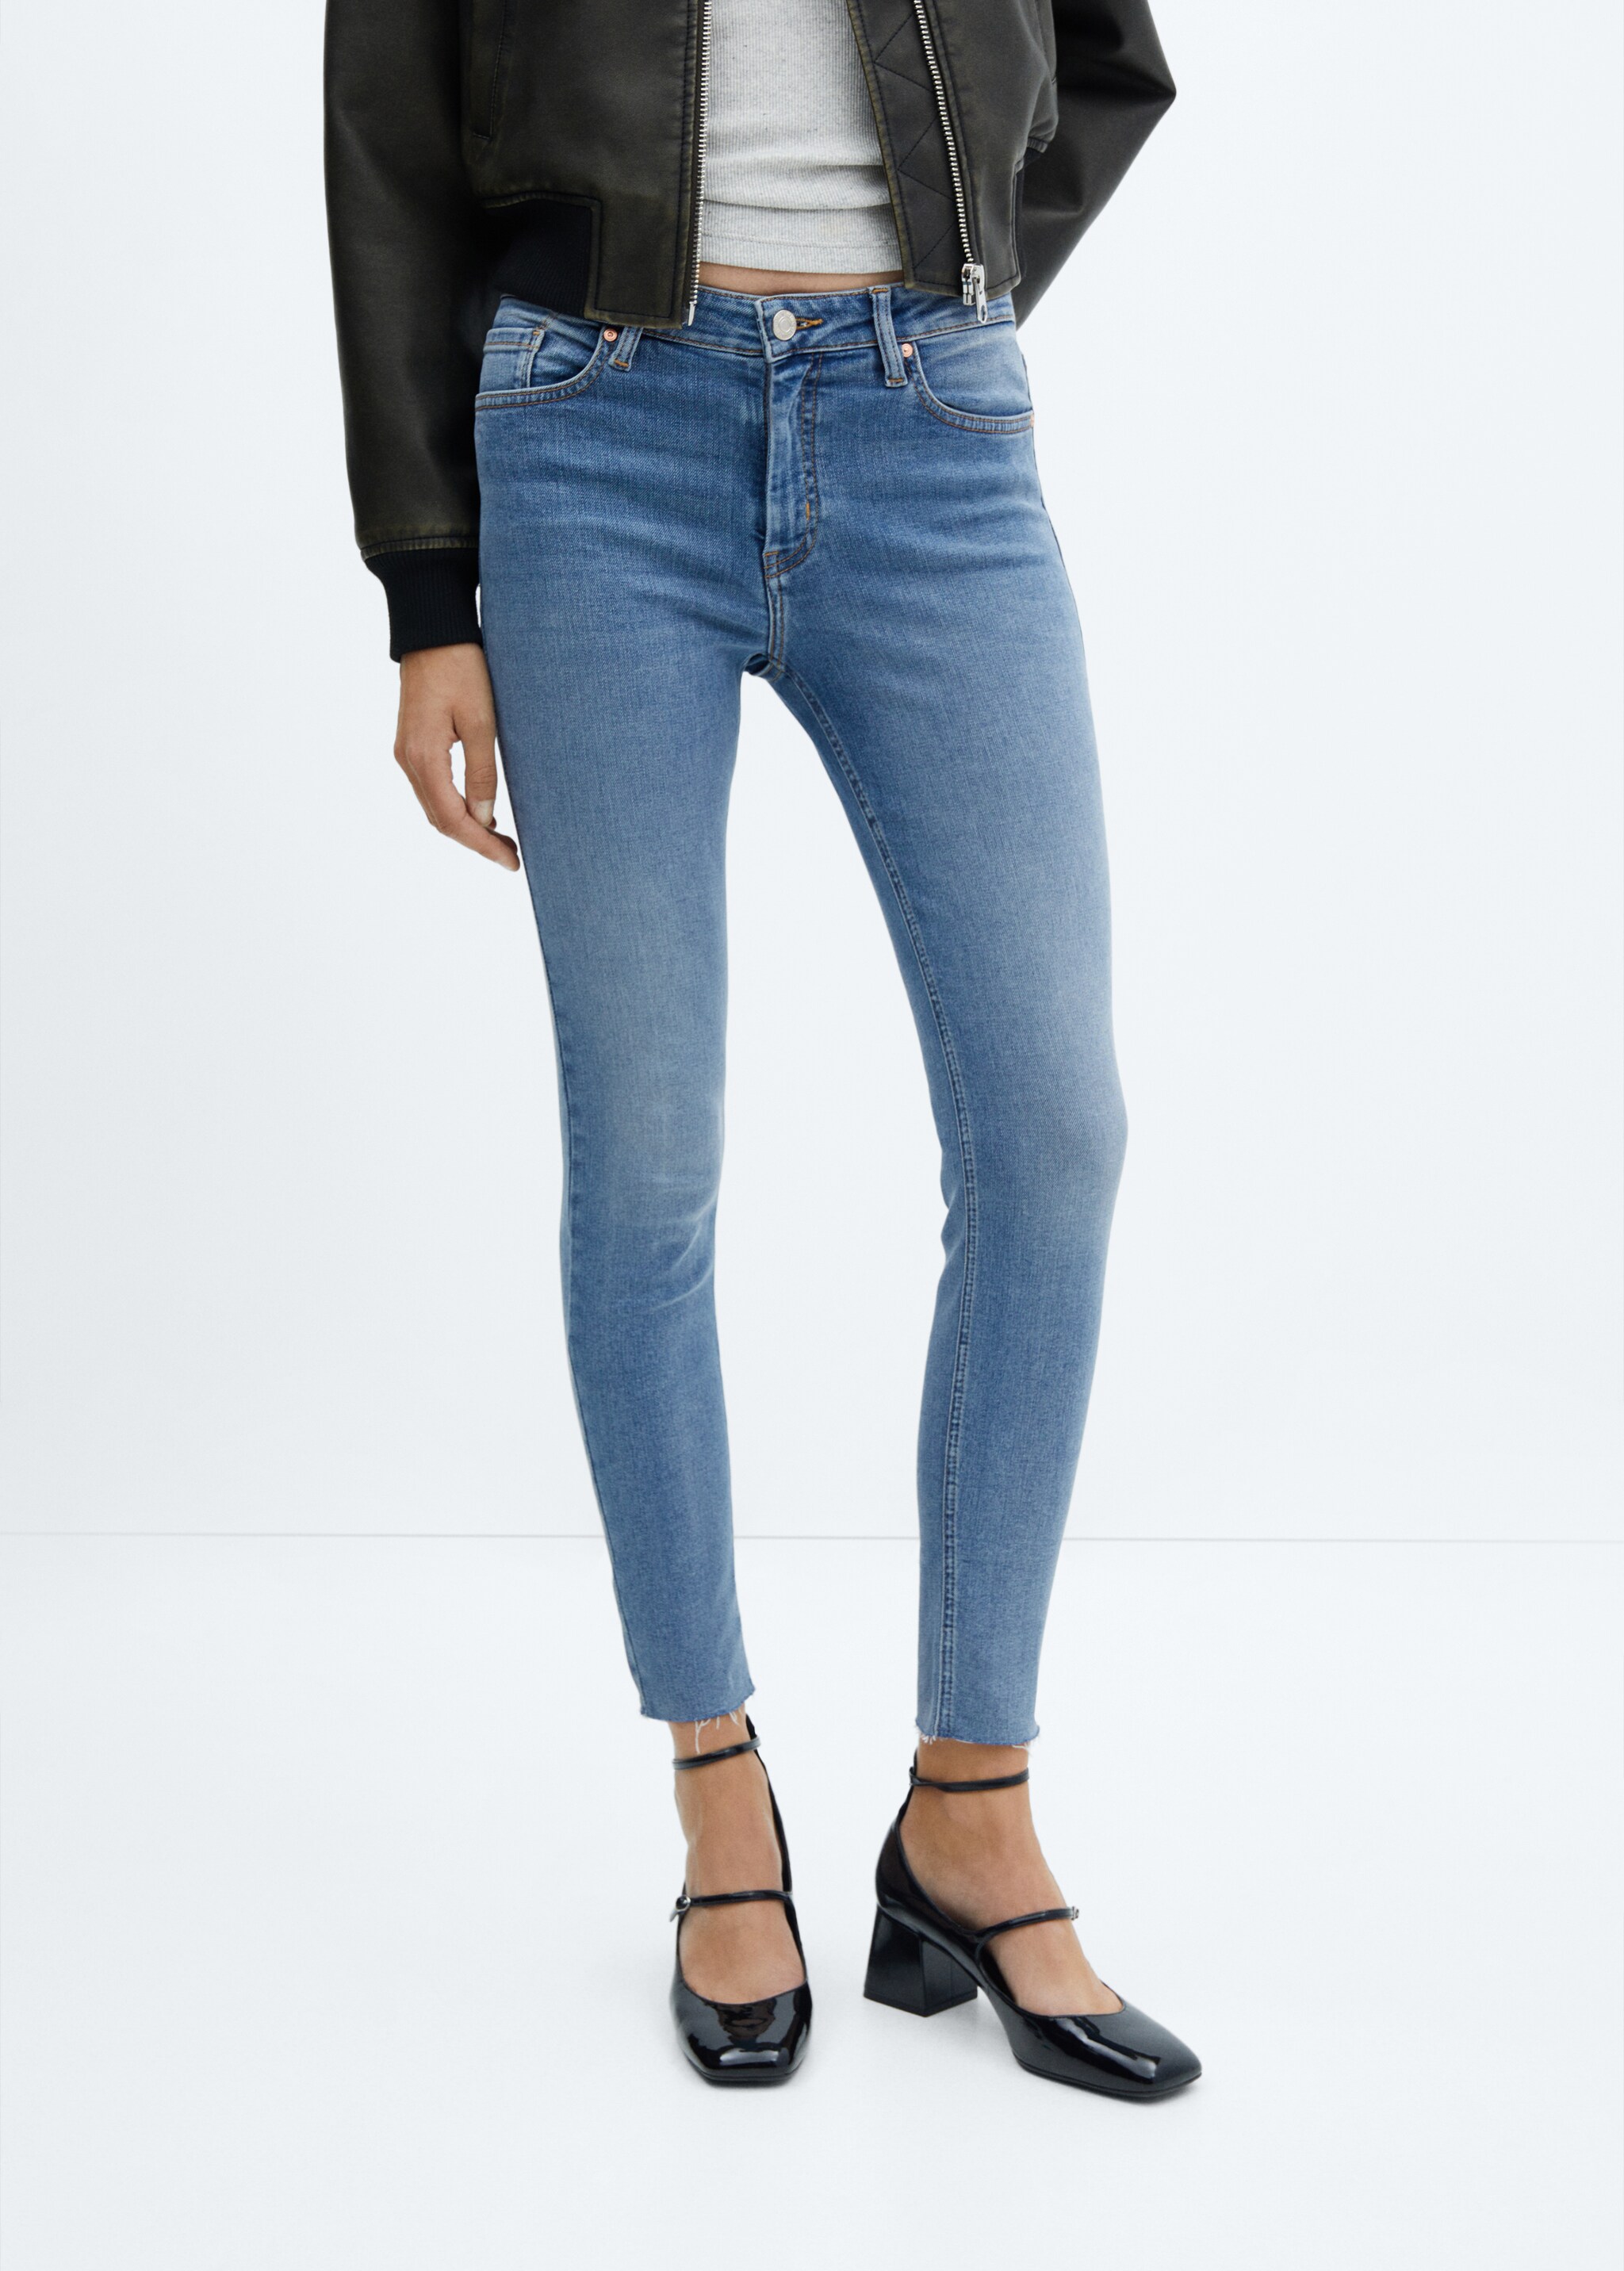 Skinny-Jeans in Cropped-Länge - Mittlere Ansicht